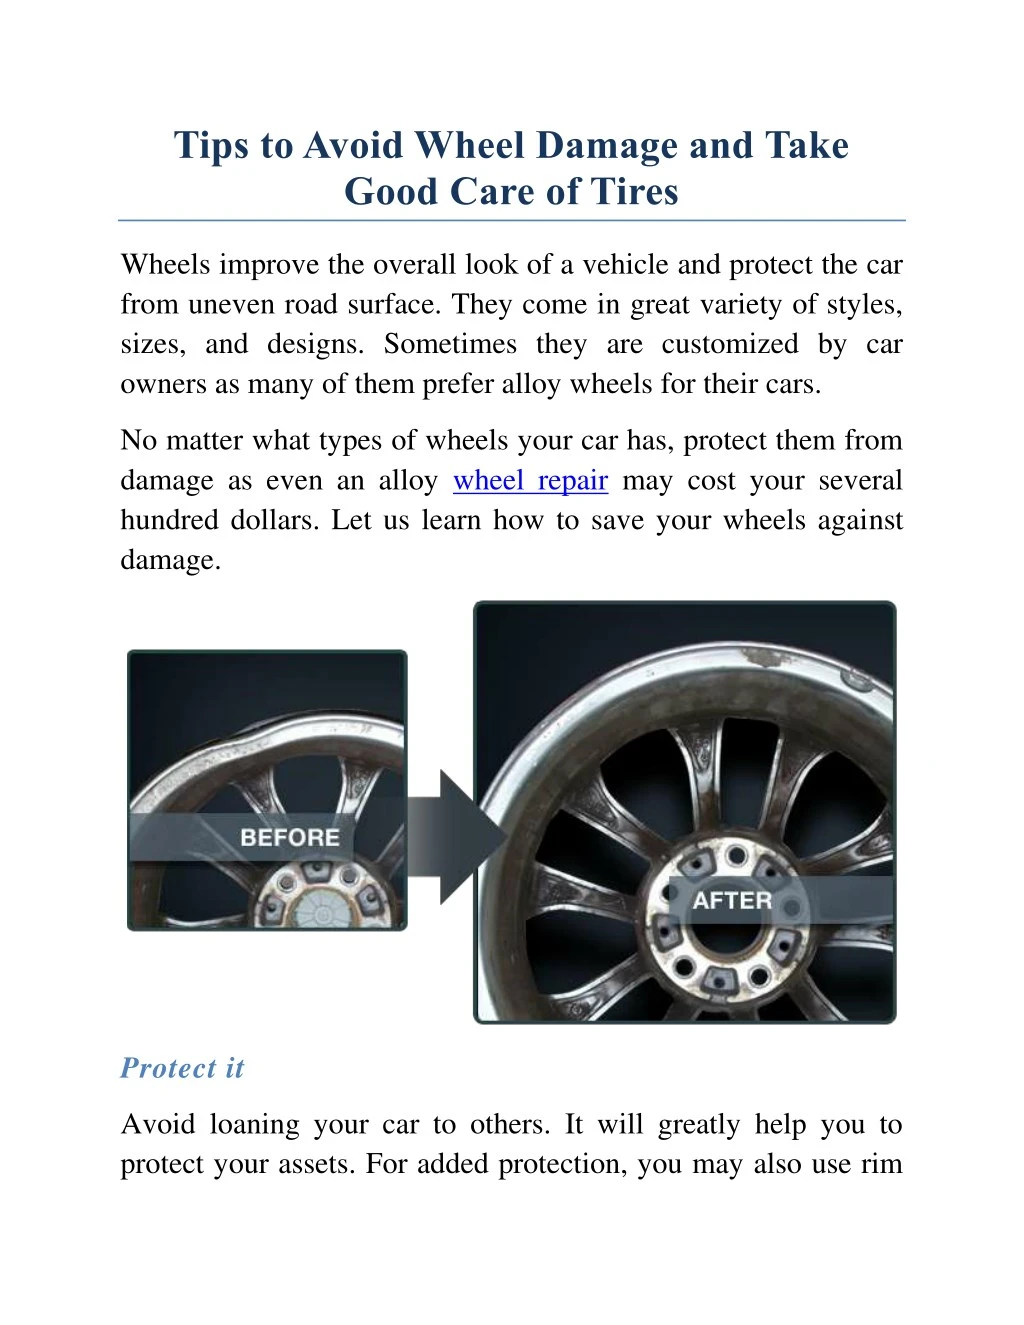 tips to avoid wheel damage and take good care